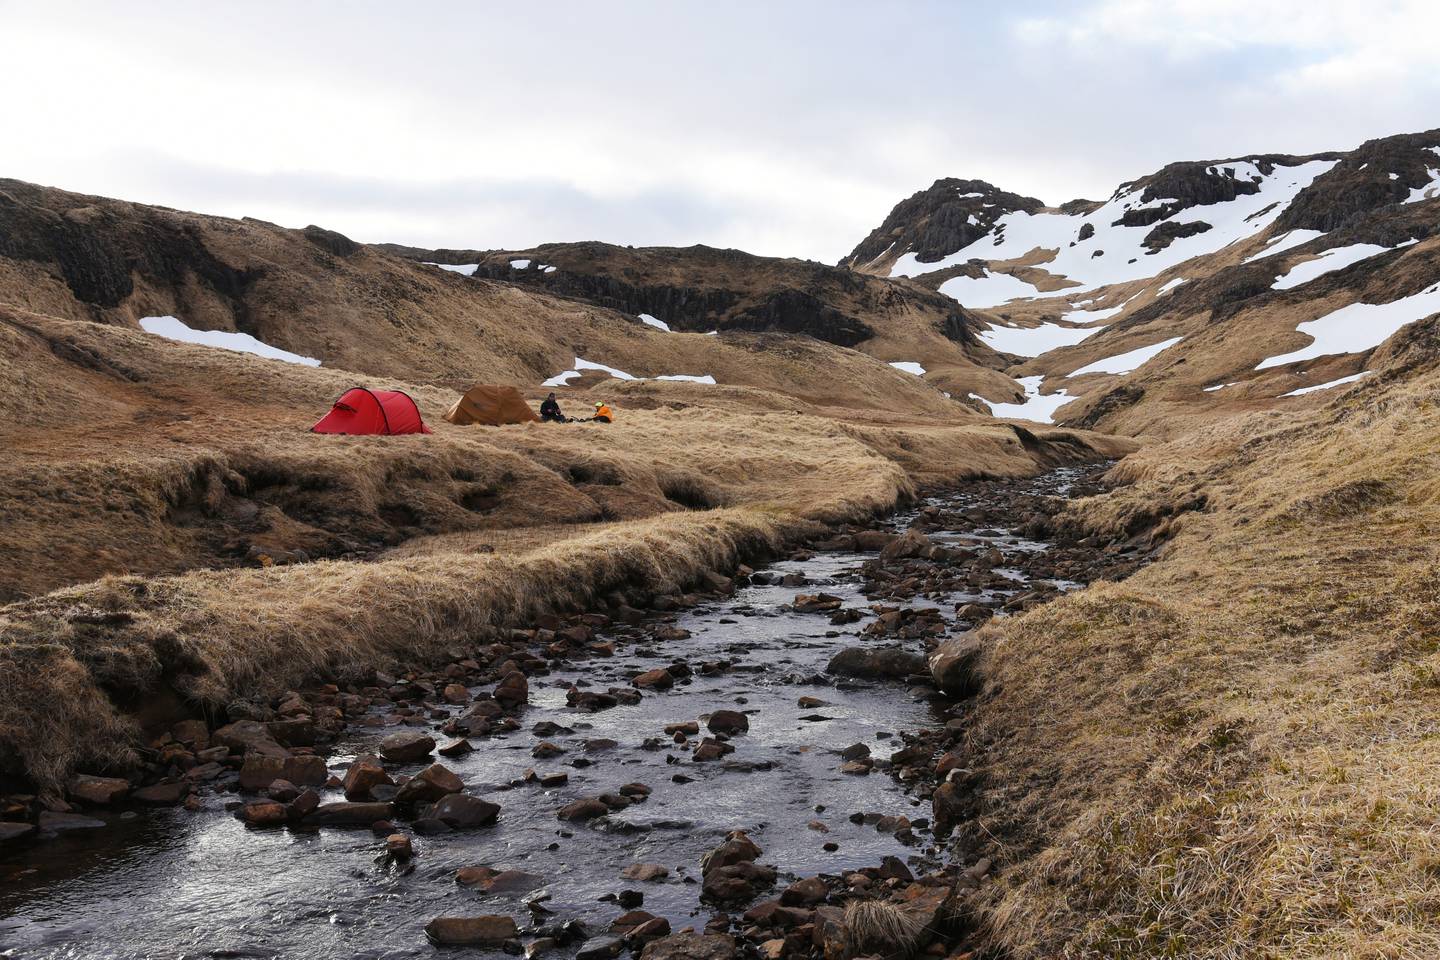 ONE TIME USE ONLY, Adak Island, camping, backpacking, hiking